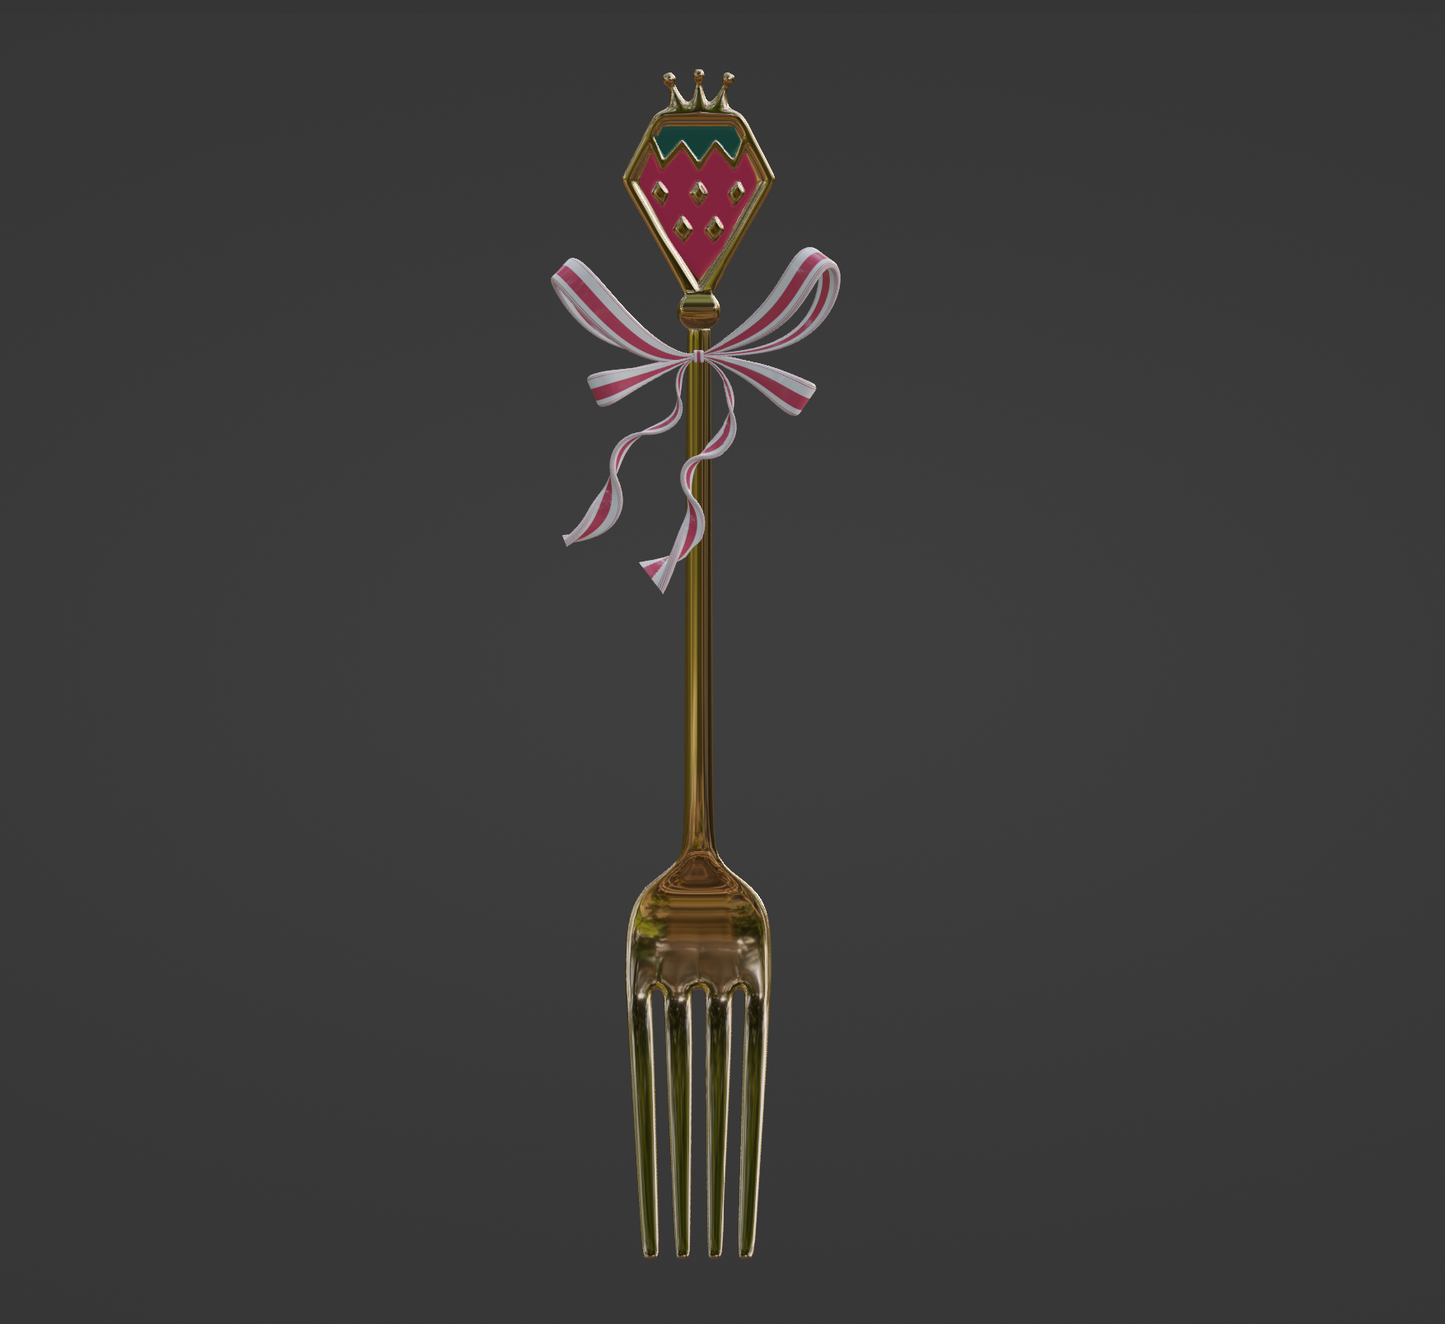 Miku Strawberry Fork - Digital 3D Model and Physical 3D Printed Kit Options - Strawberry Miku Cosplay